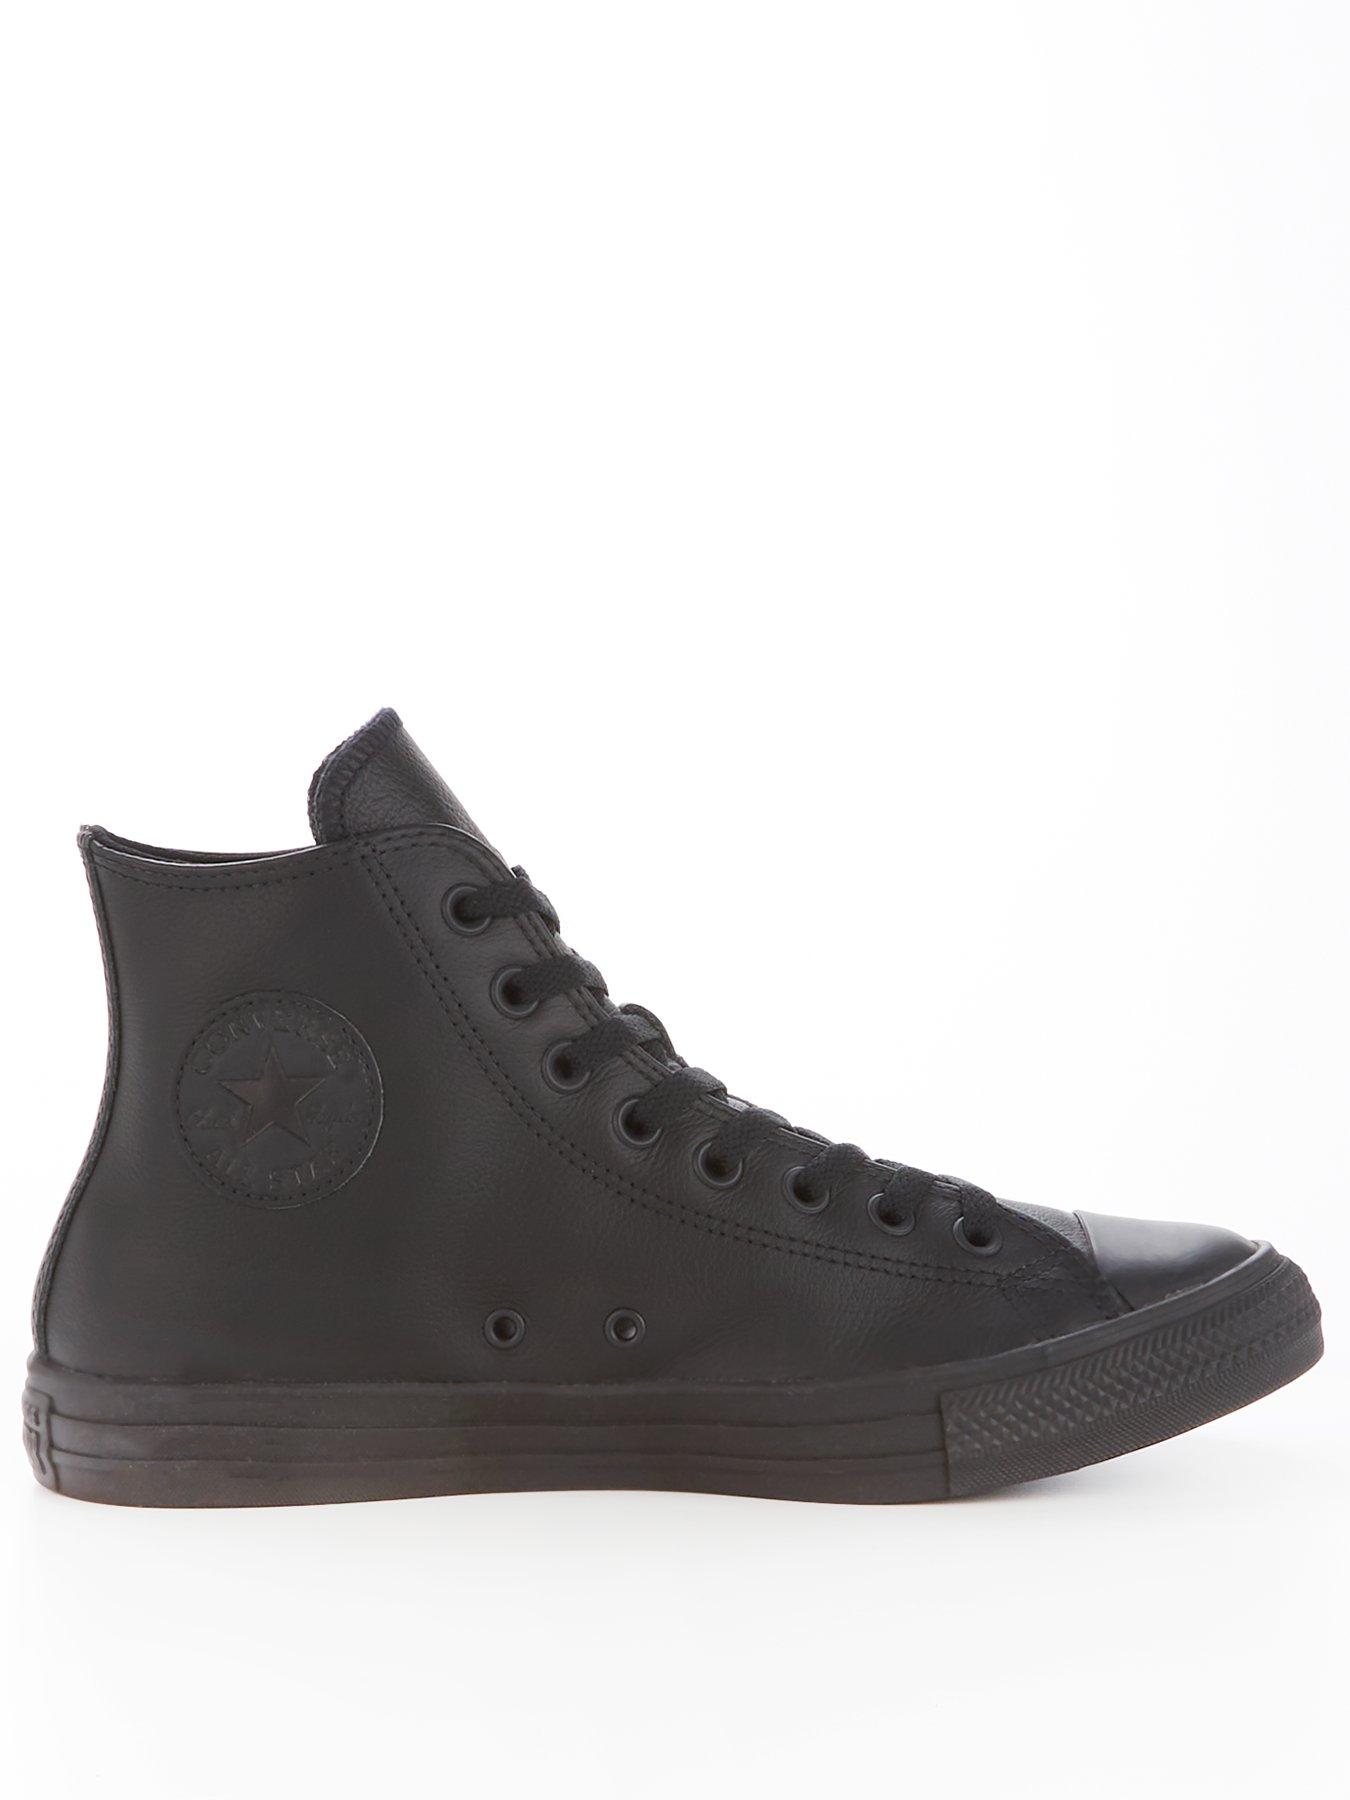 Converse Chuck Taylor All Star Leather Hi-Tops - Black | littlewoods.com